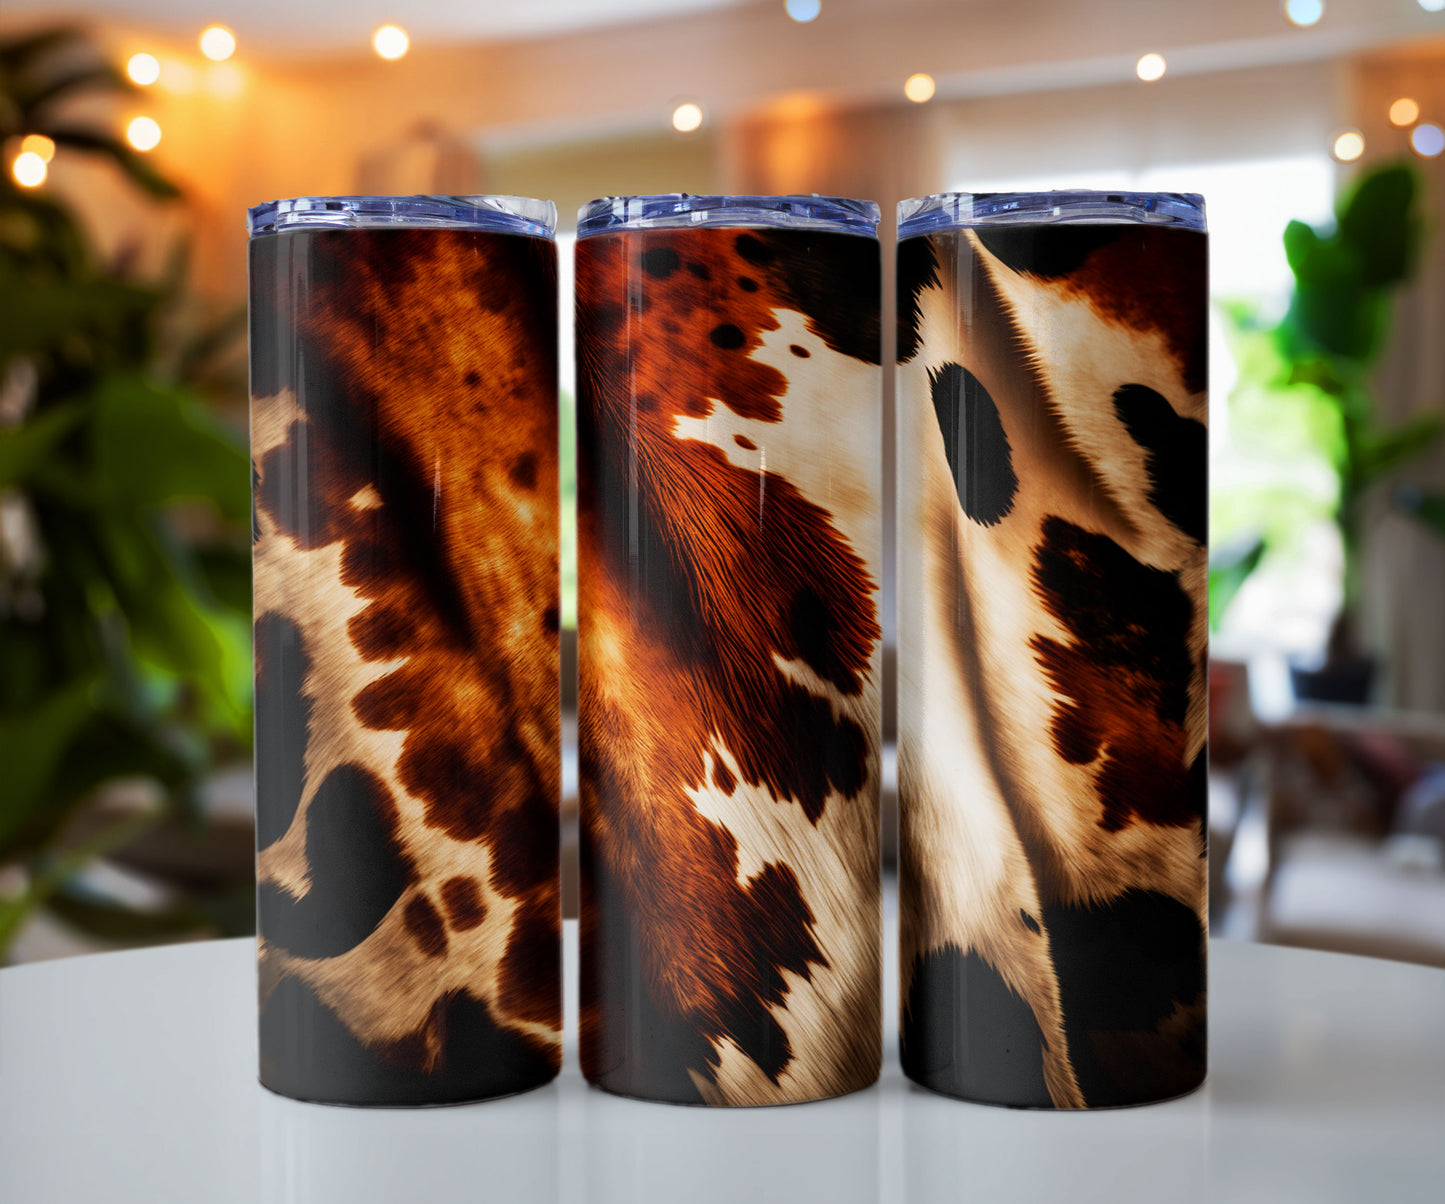 Cow Hide 3 D Print Stainless steel tumbler CedarHill Country Market